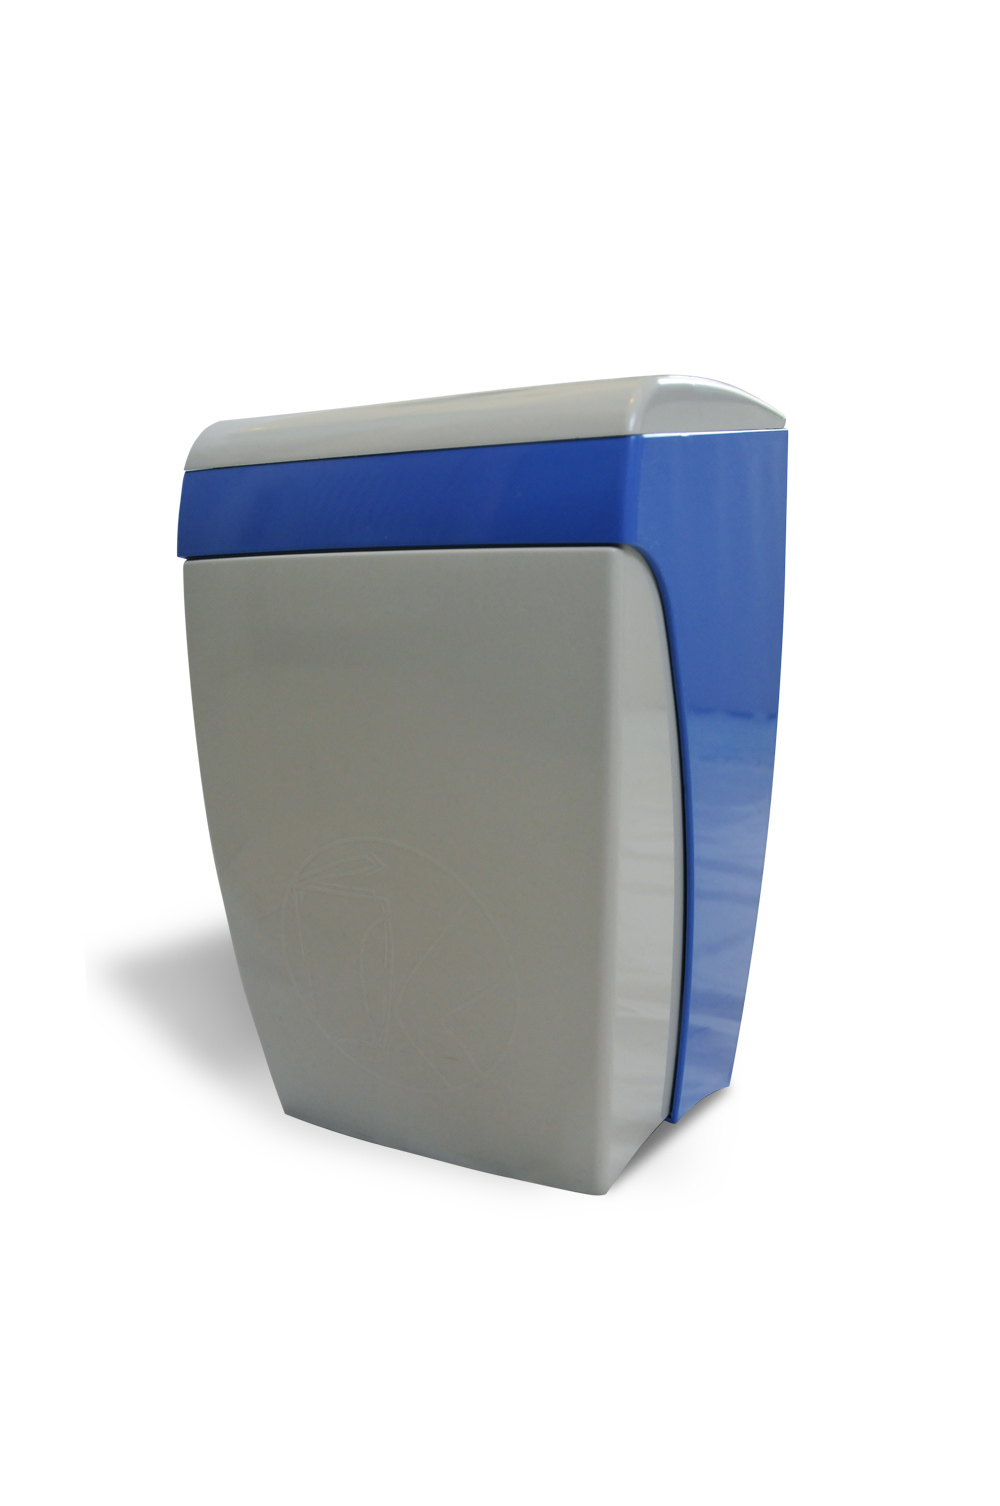 WALLY knee-operated dustbin in blue and grey